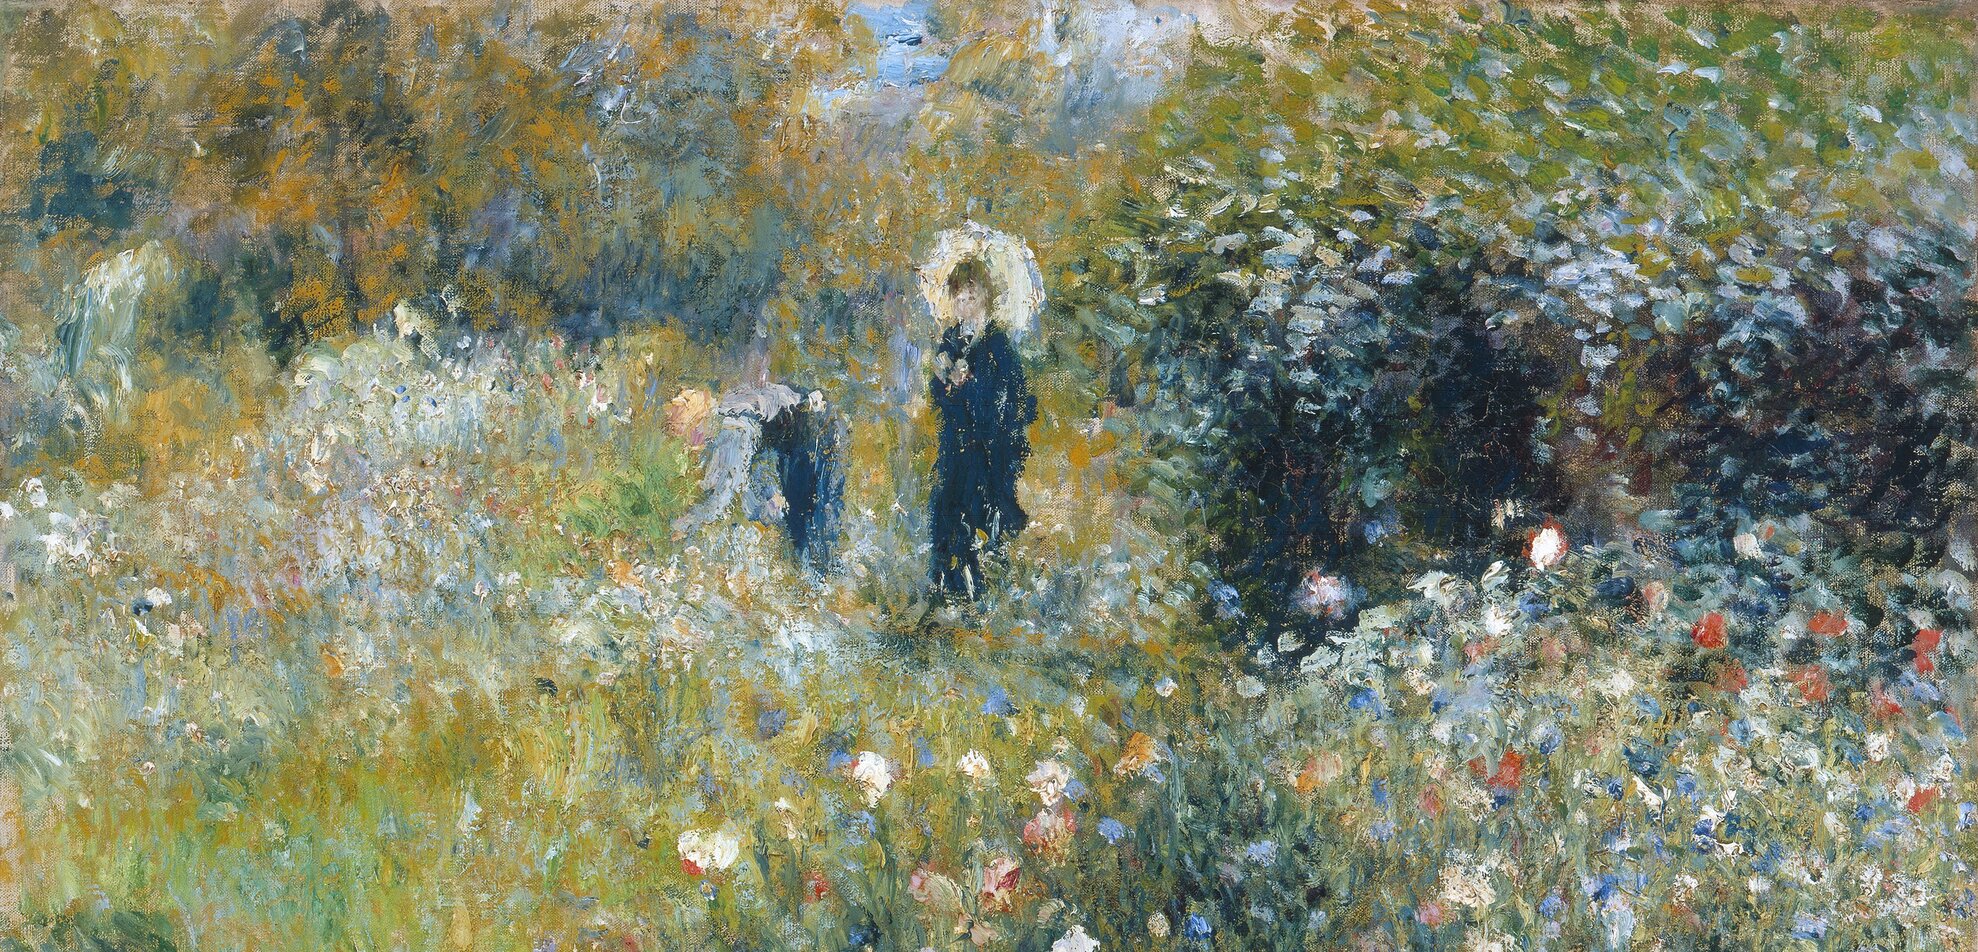 Renoir – The Painter and his Models